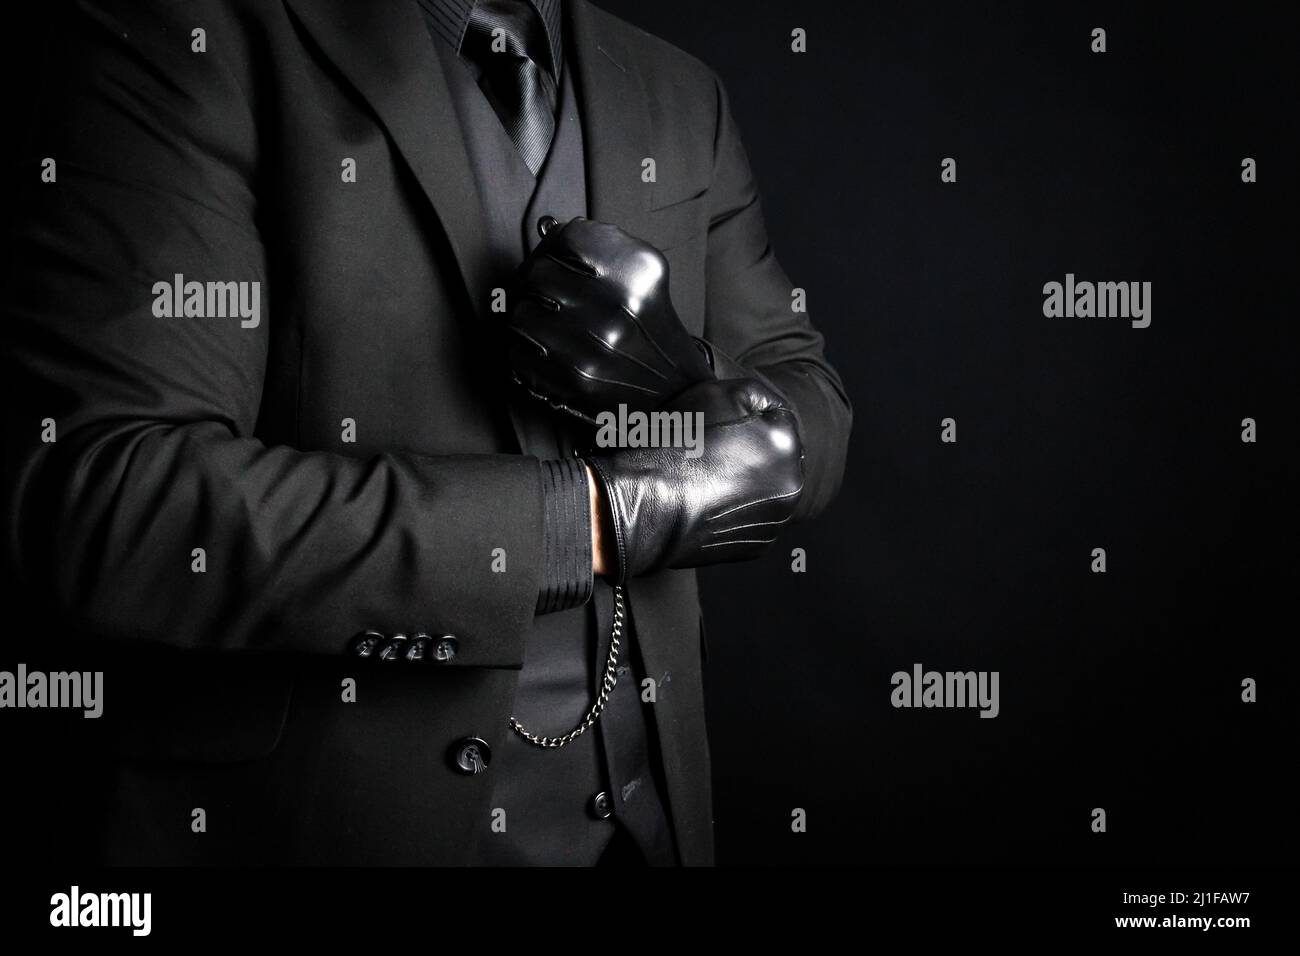 Portrait of Strong Man in Dark Suit Pulling on Black Leather Gloves. Concept of Mafia Hitman or Gentleman Assassin Stock Photo